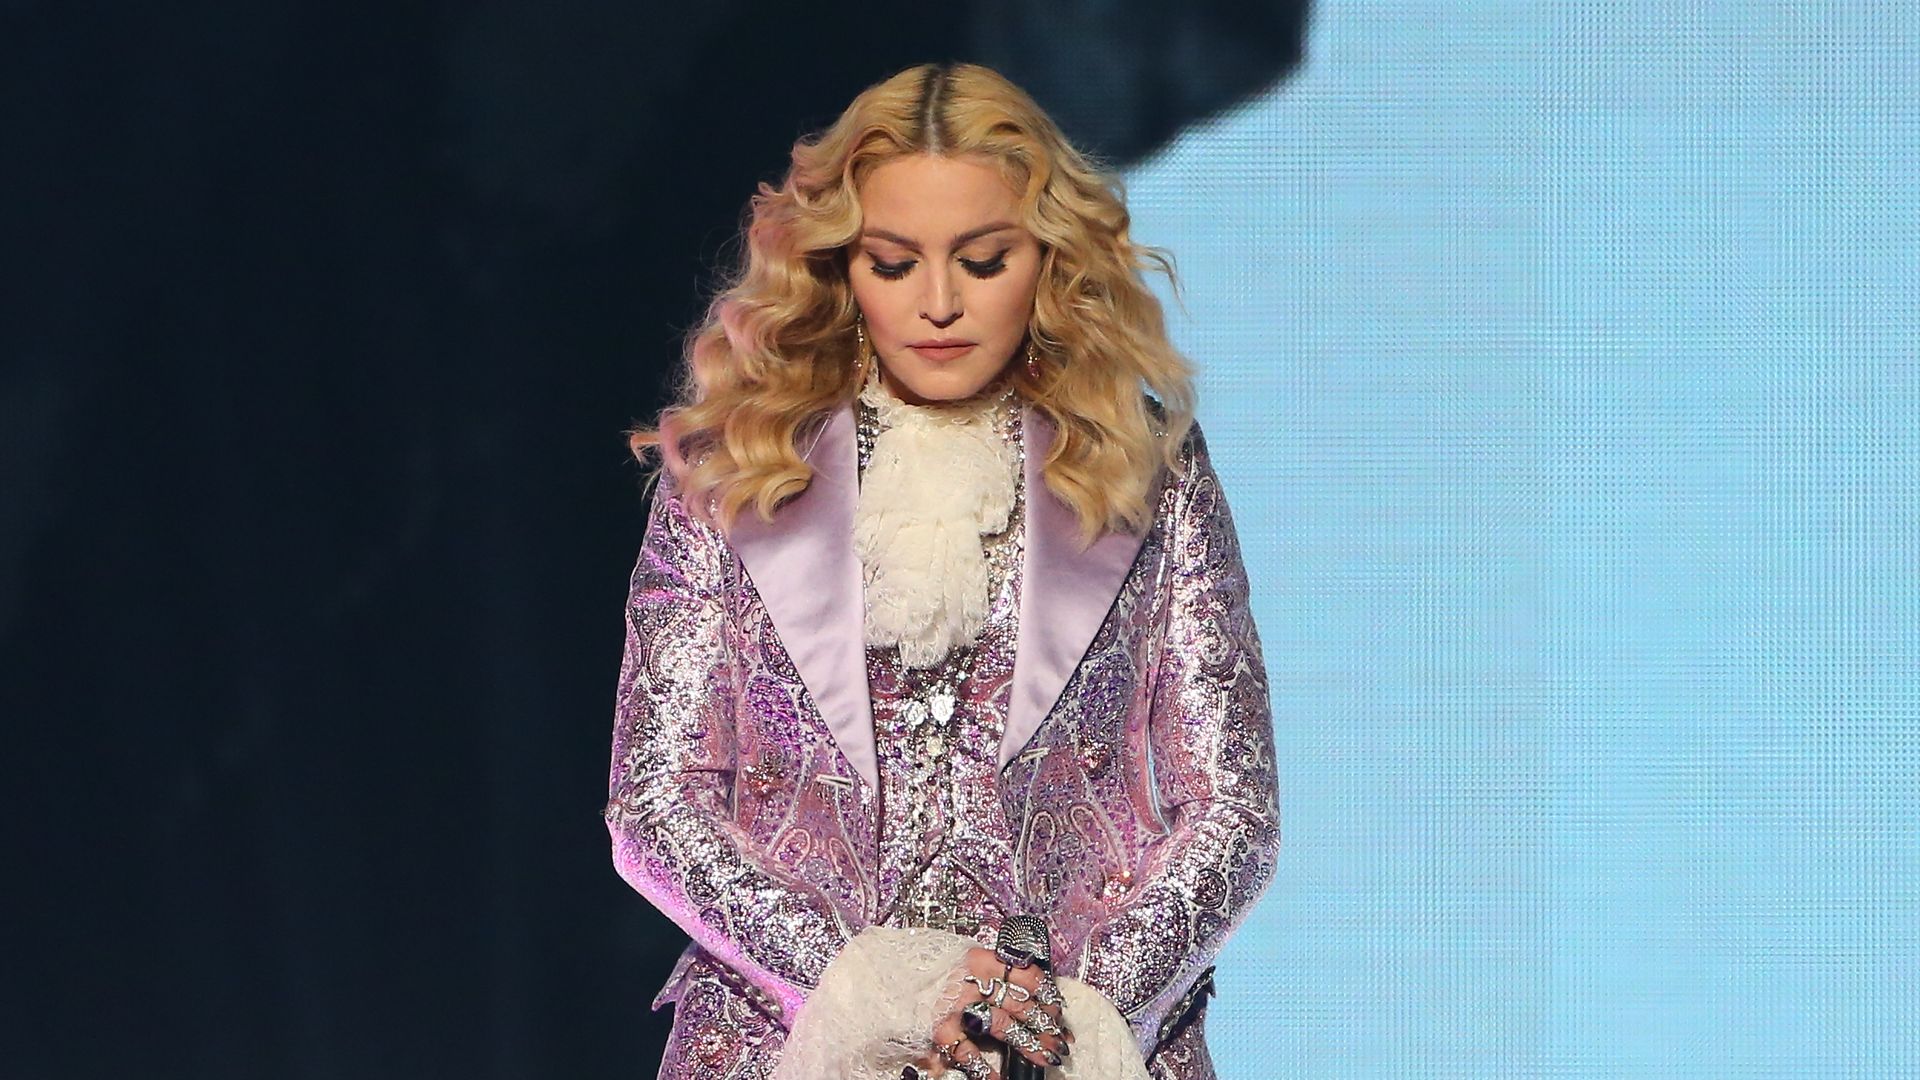 Madonna, clad in a purple suit, during a 2016 performance